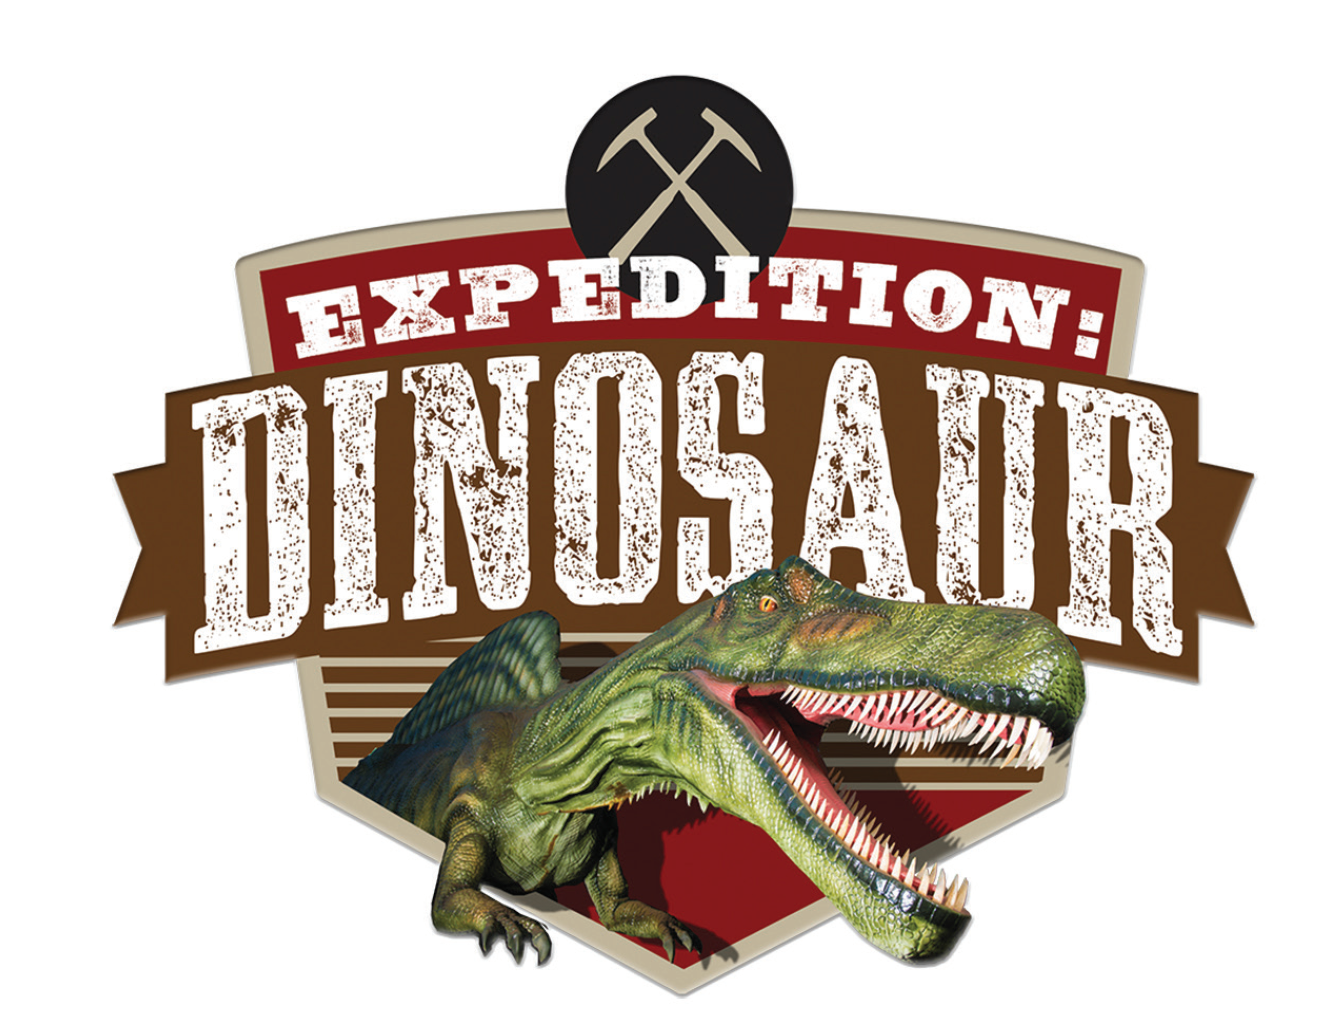 Roar & Explore Weekends at the Museum of Discovery and Science